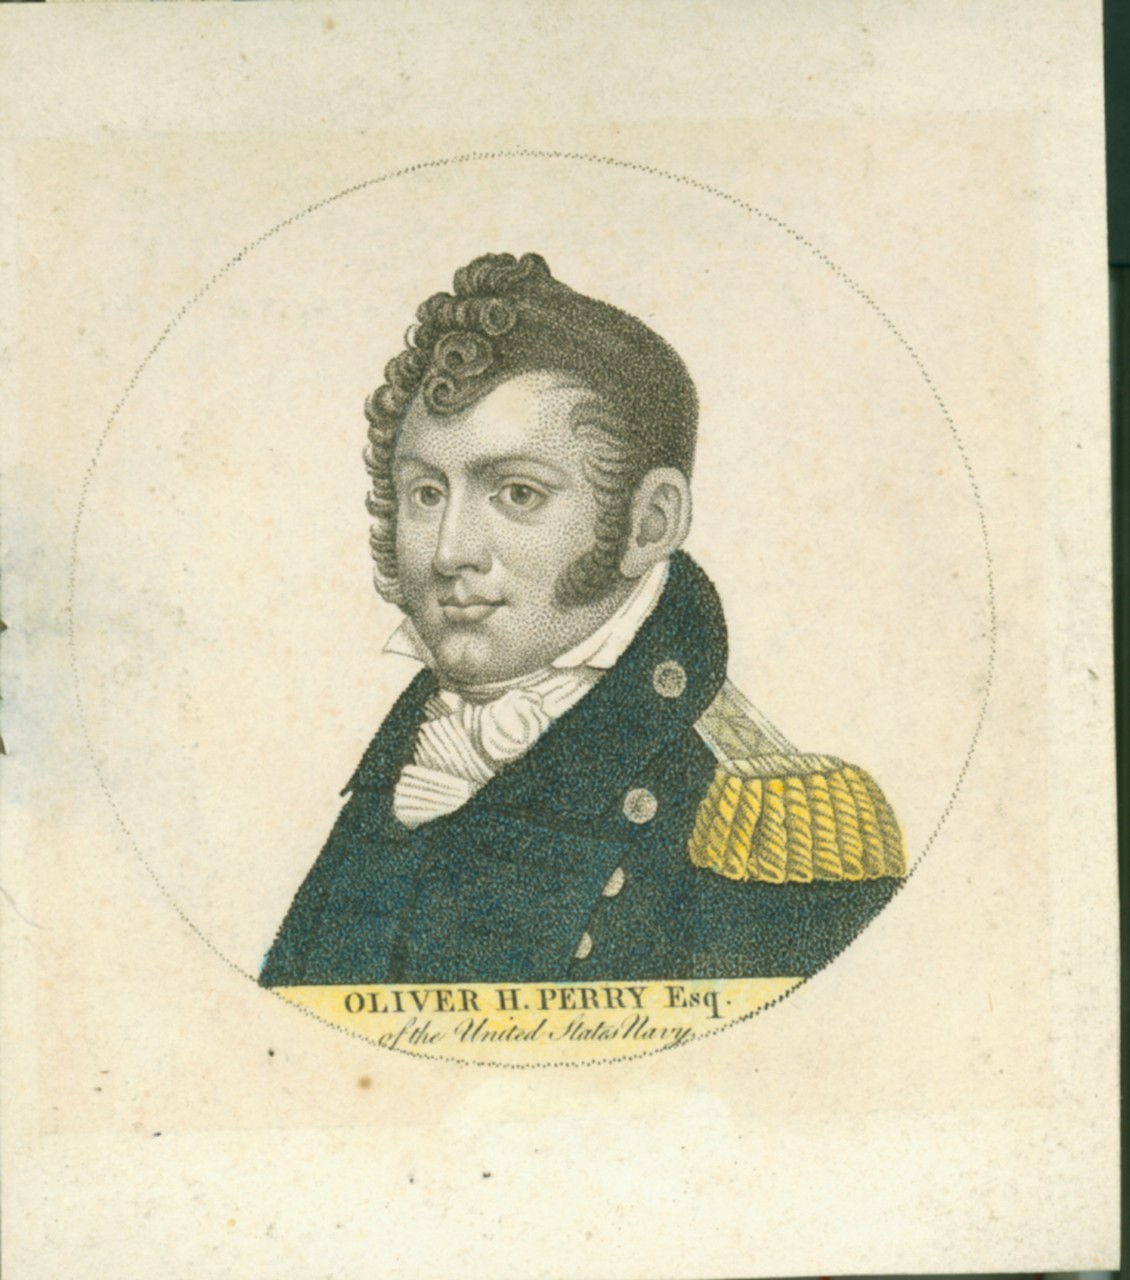 A round portrait of Oliver Hazard Perry in an officer’s uniform